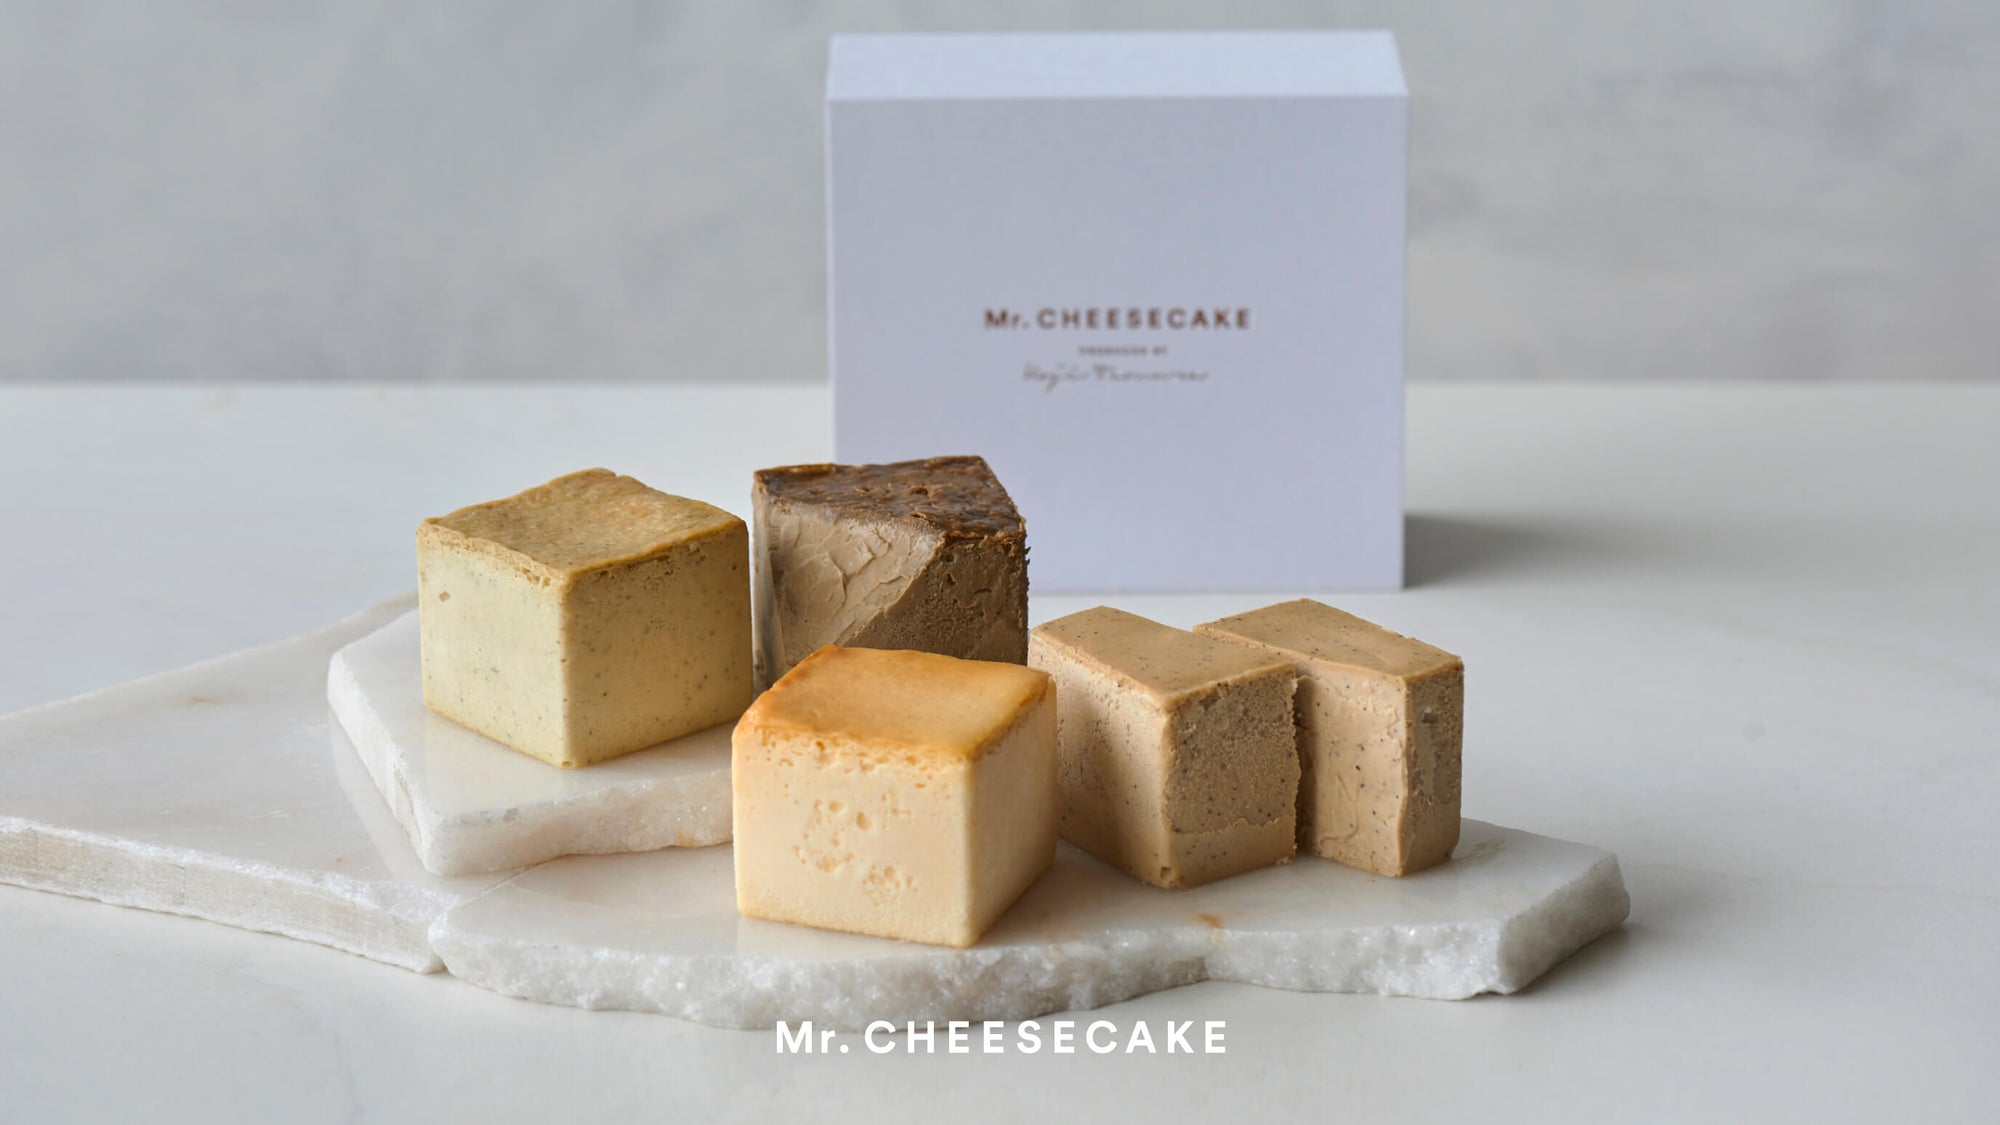 Mr. CHEESECAKE assorted 4-Cube Box Tea Collection